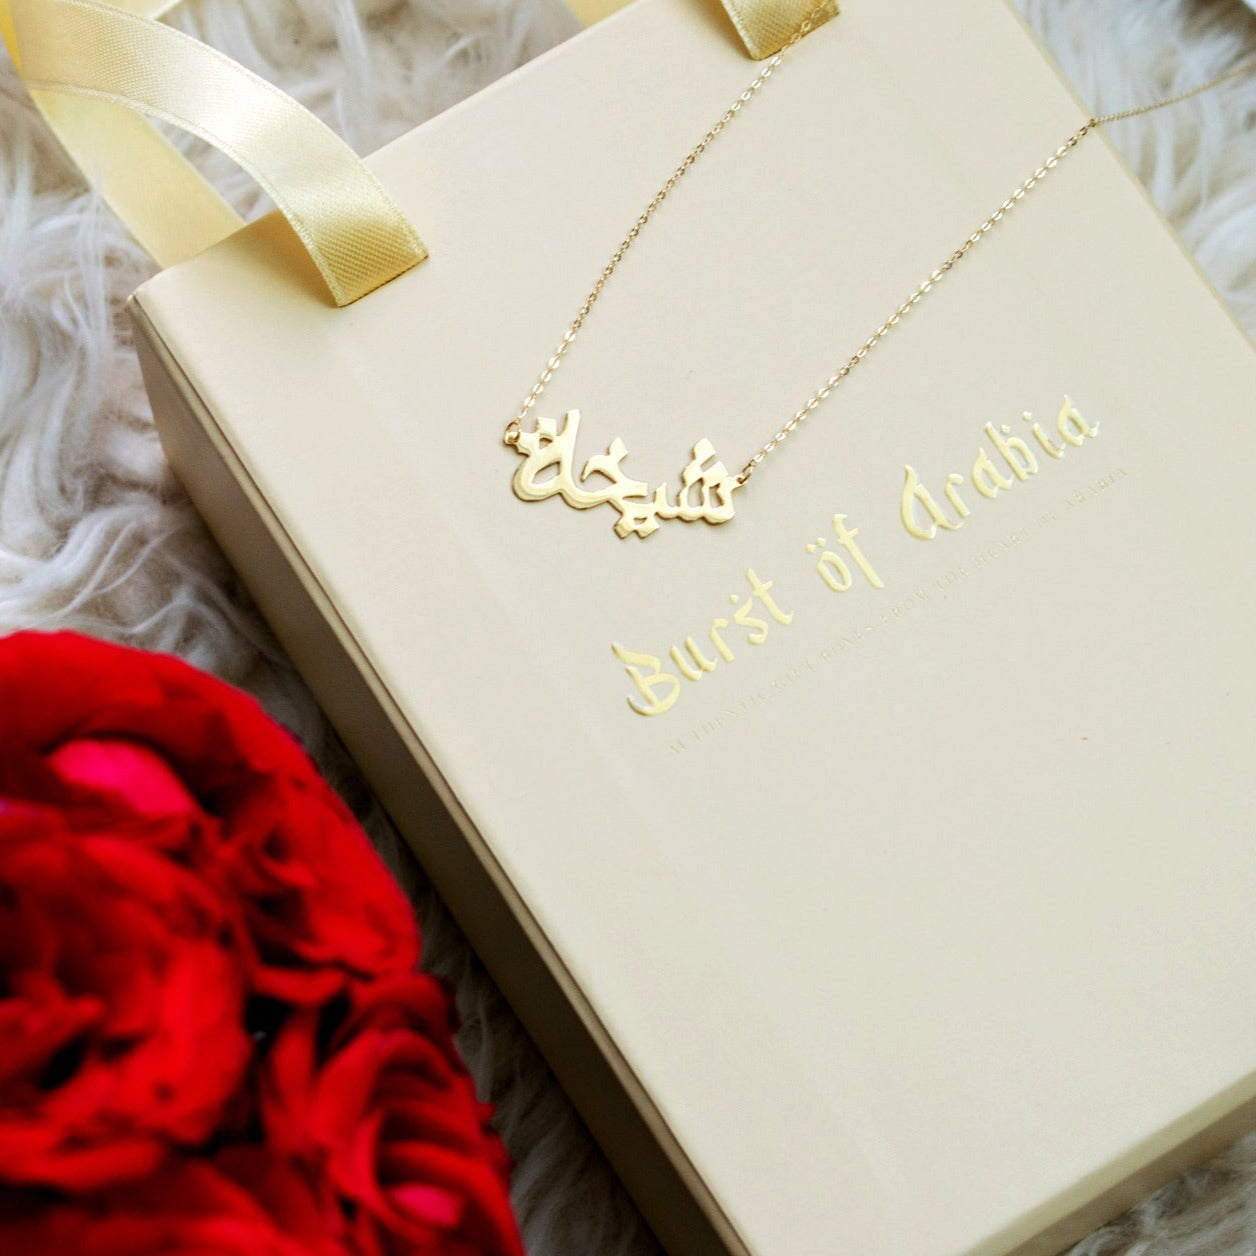 Customized gifts in Dubai, Abu Dhabi, UAE. Order personalized jewelry for women. Luxury gift for wife, birthday gift for girlfriend, anniversary gifts for her.